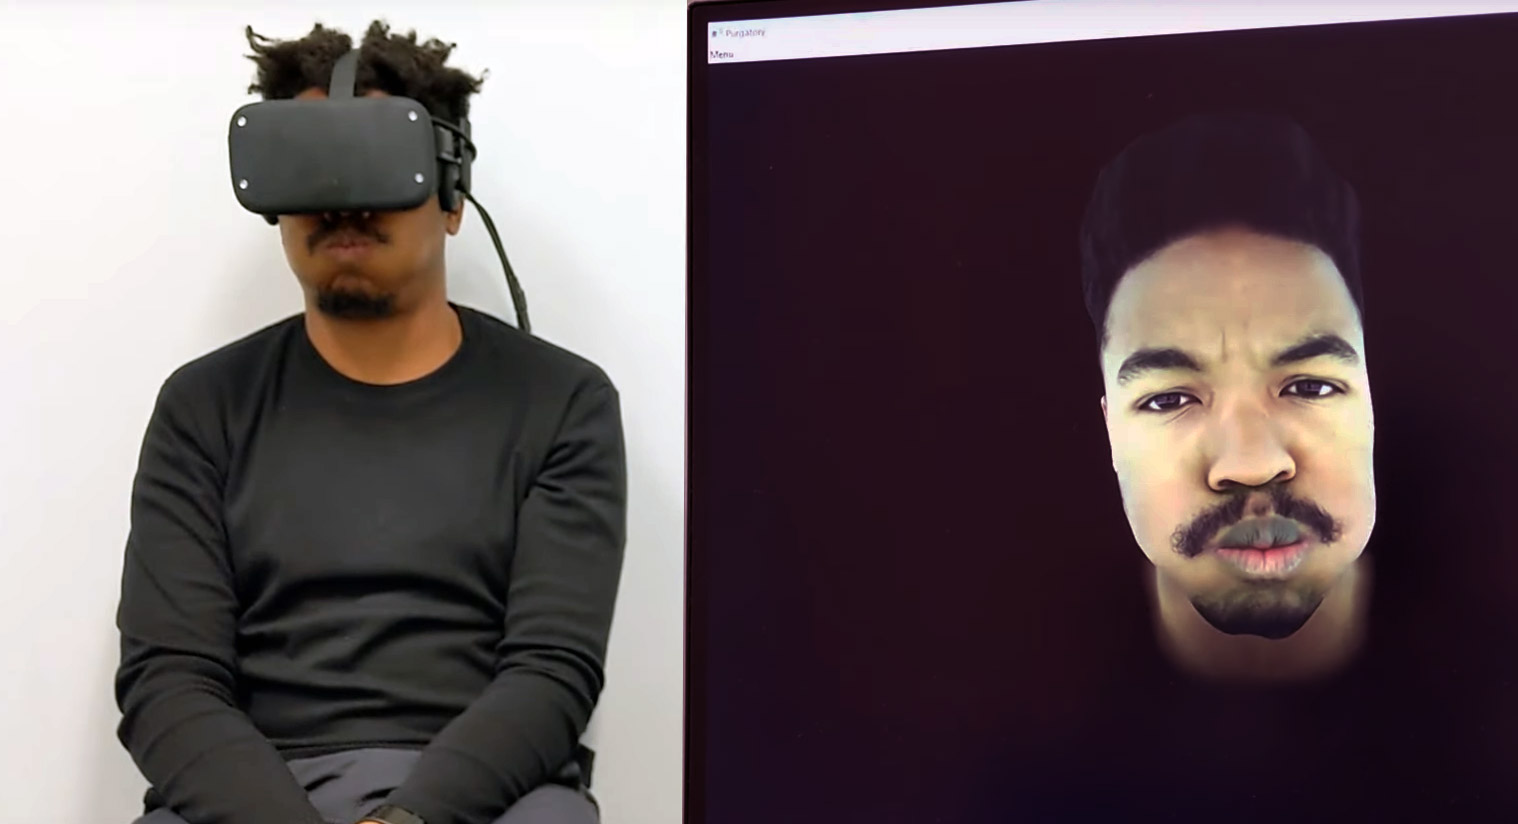 Facebook Publishes New Research on Hyper-realistic Virtual Avatars